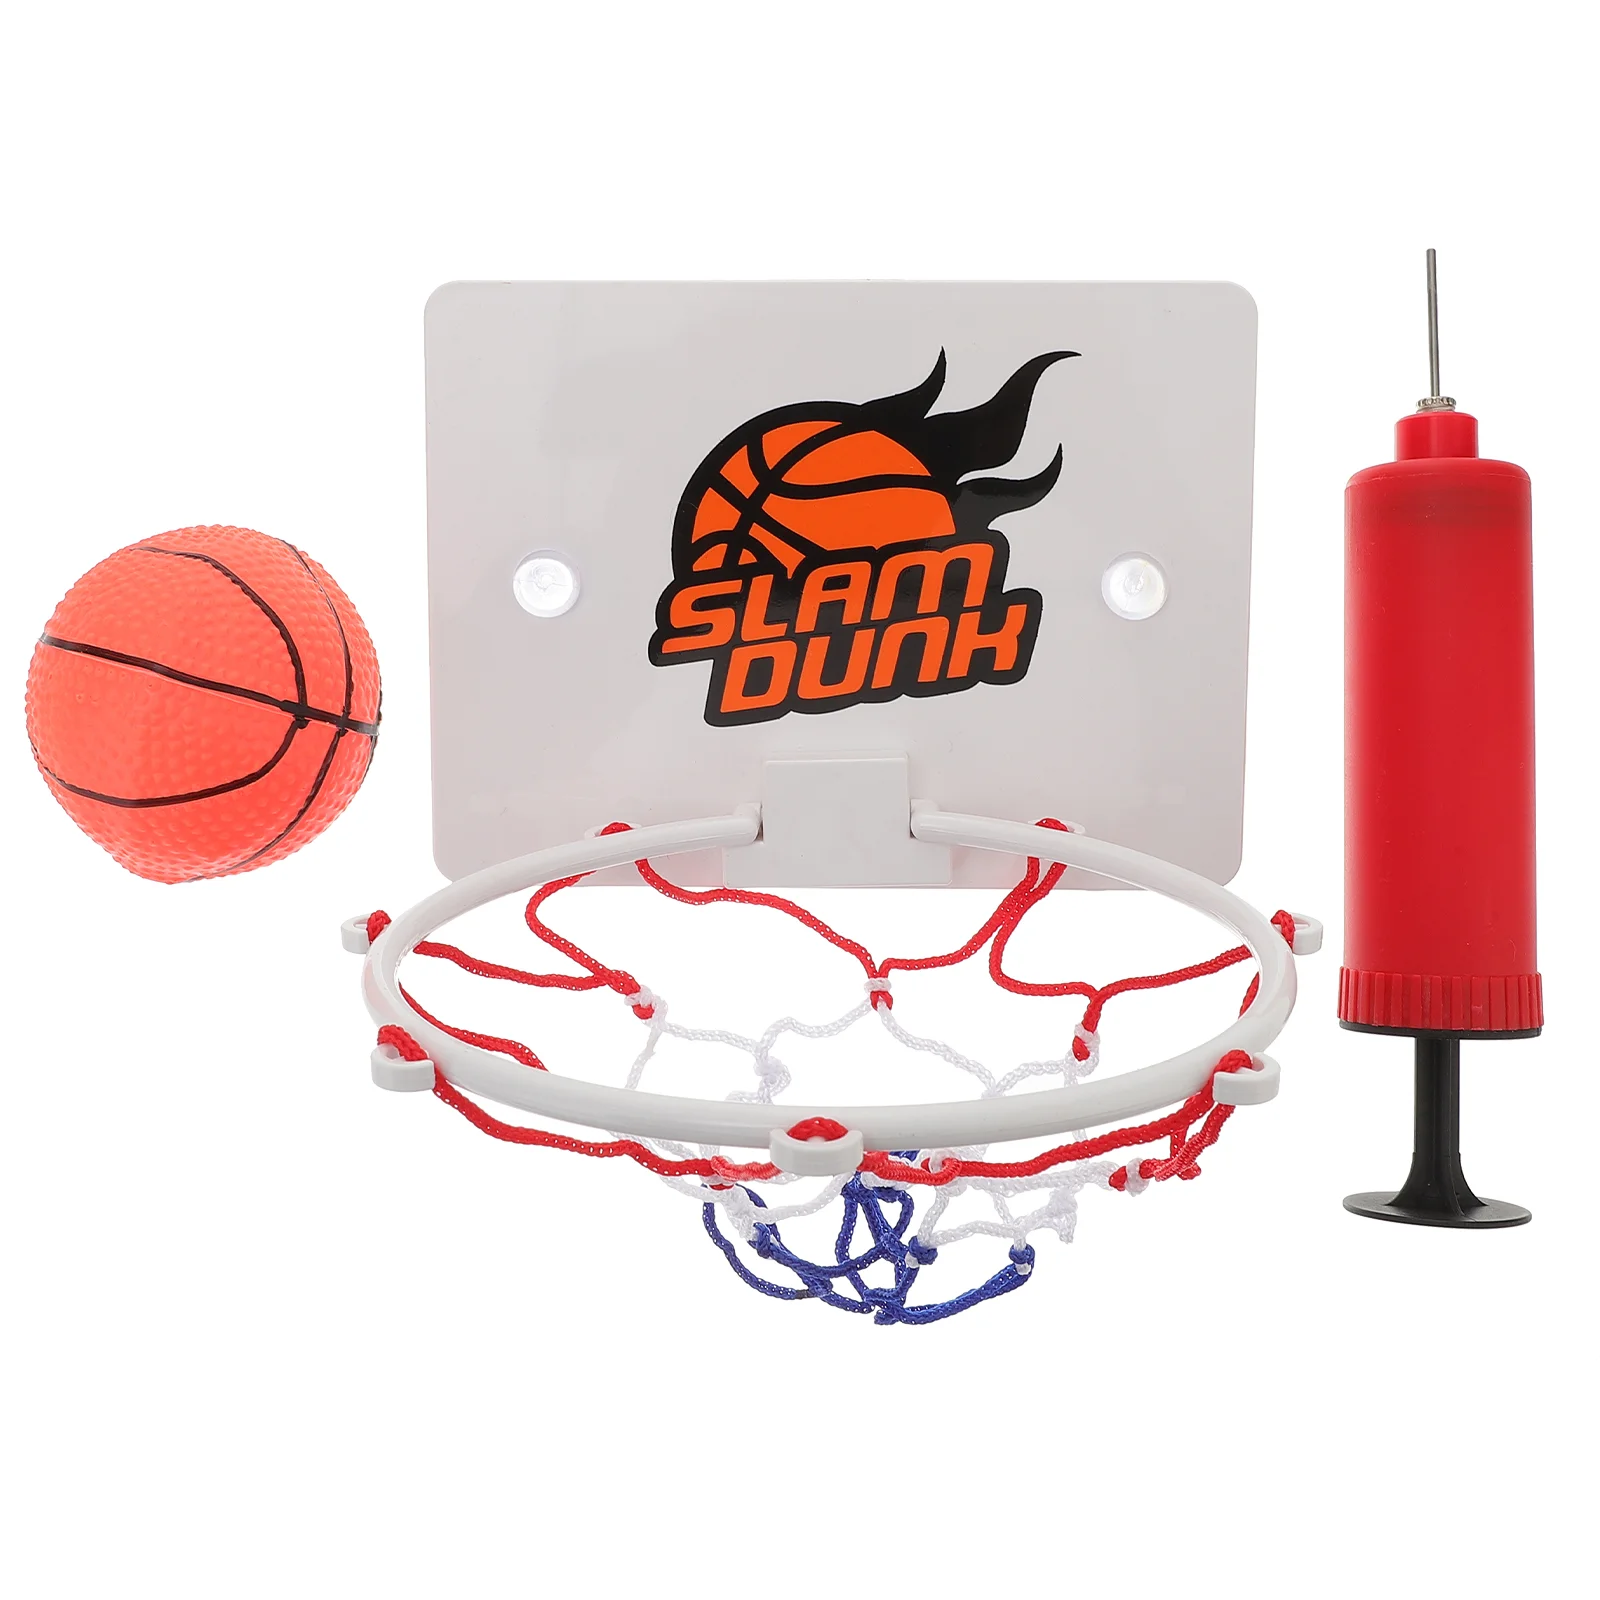 Basketball Over the Door Basketball Backboard Sports Exercise with Pump and Balls for Basketball Lovers Boys Indoor Outdoor active play and physical activity with children outdoor garden swings swings for children toys for children sports game